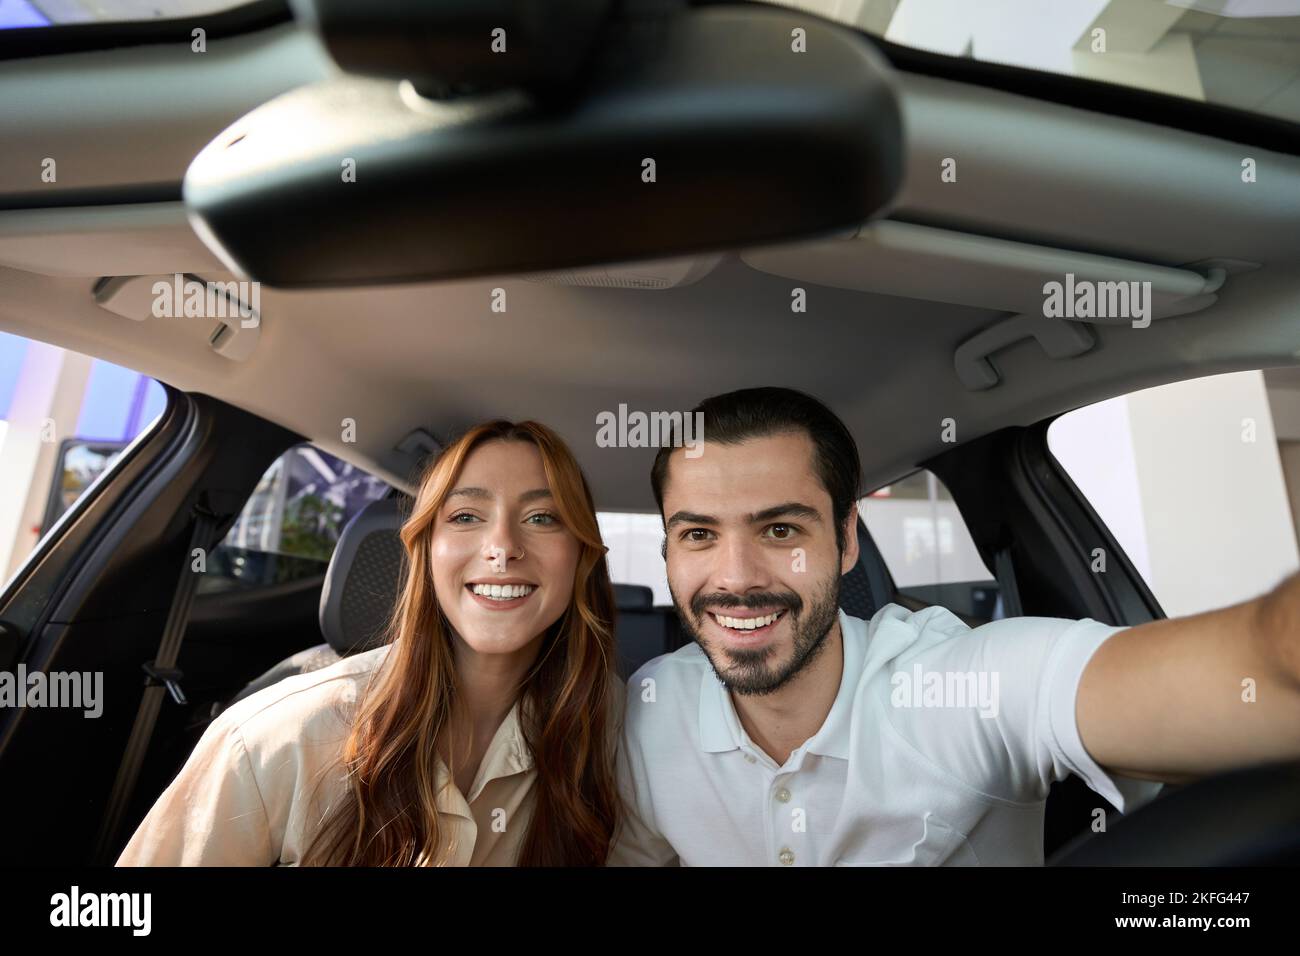 Happy couple taking selfies in new vehicle Stock Photo